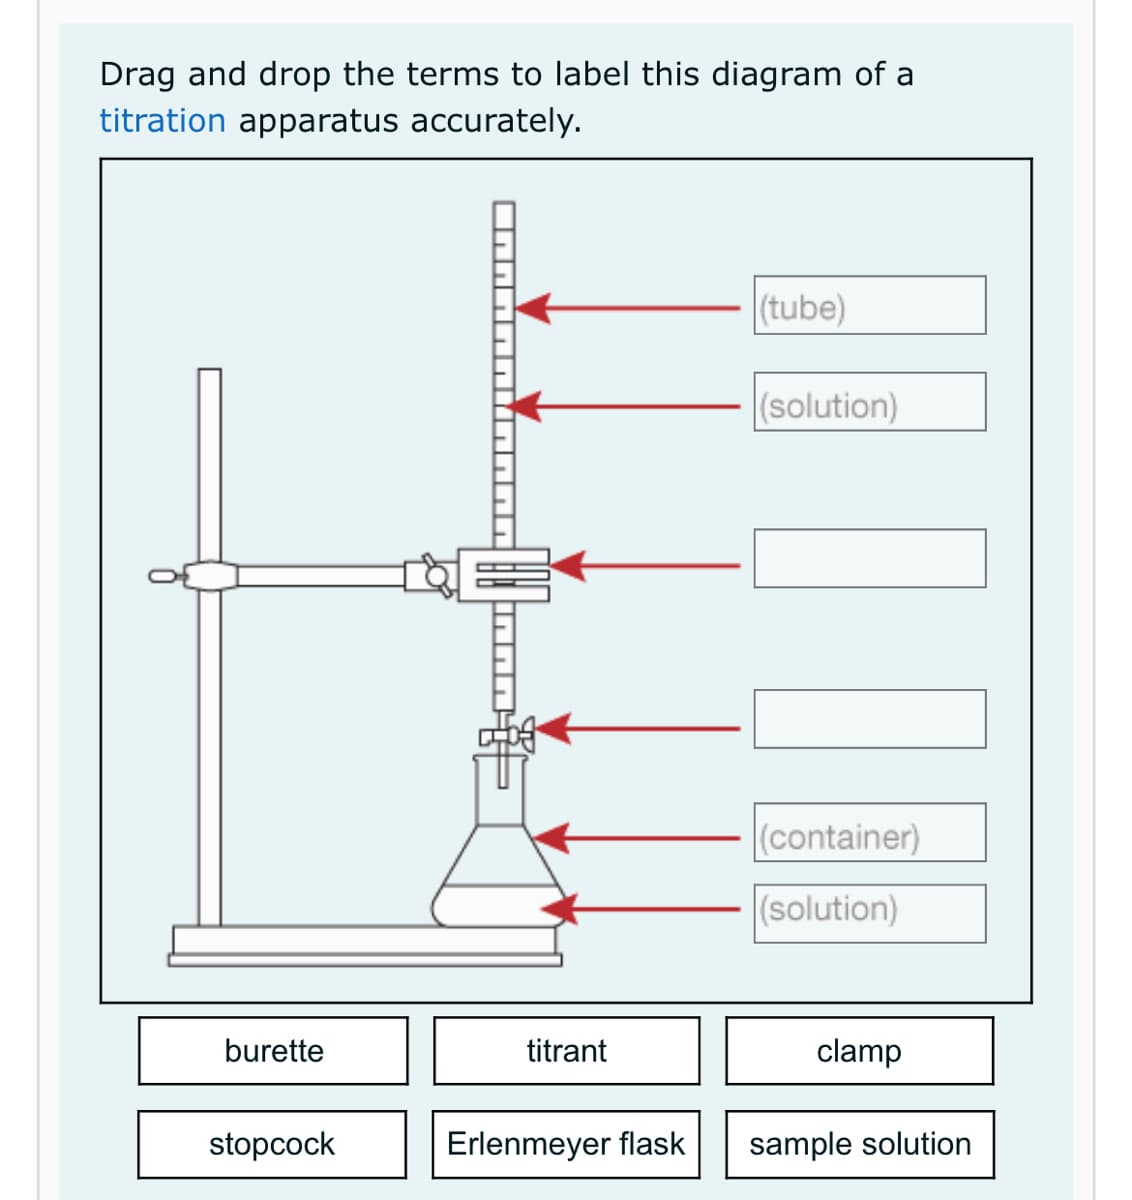 Drag and drop the terms to label this diagram of a
titration apparatus accurately.
burette
stopcock
●NAAAAIANNI
titrant
Erlenmeyer flask
(tube)
(solution)
11
(container)
(solution)
clamp
sample solution